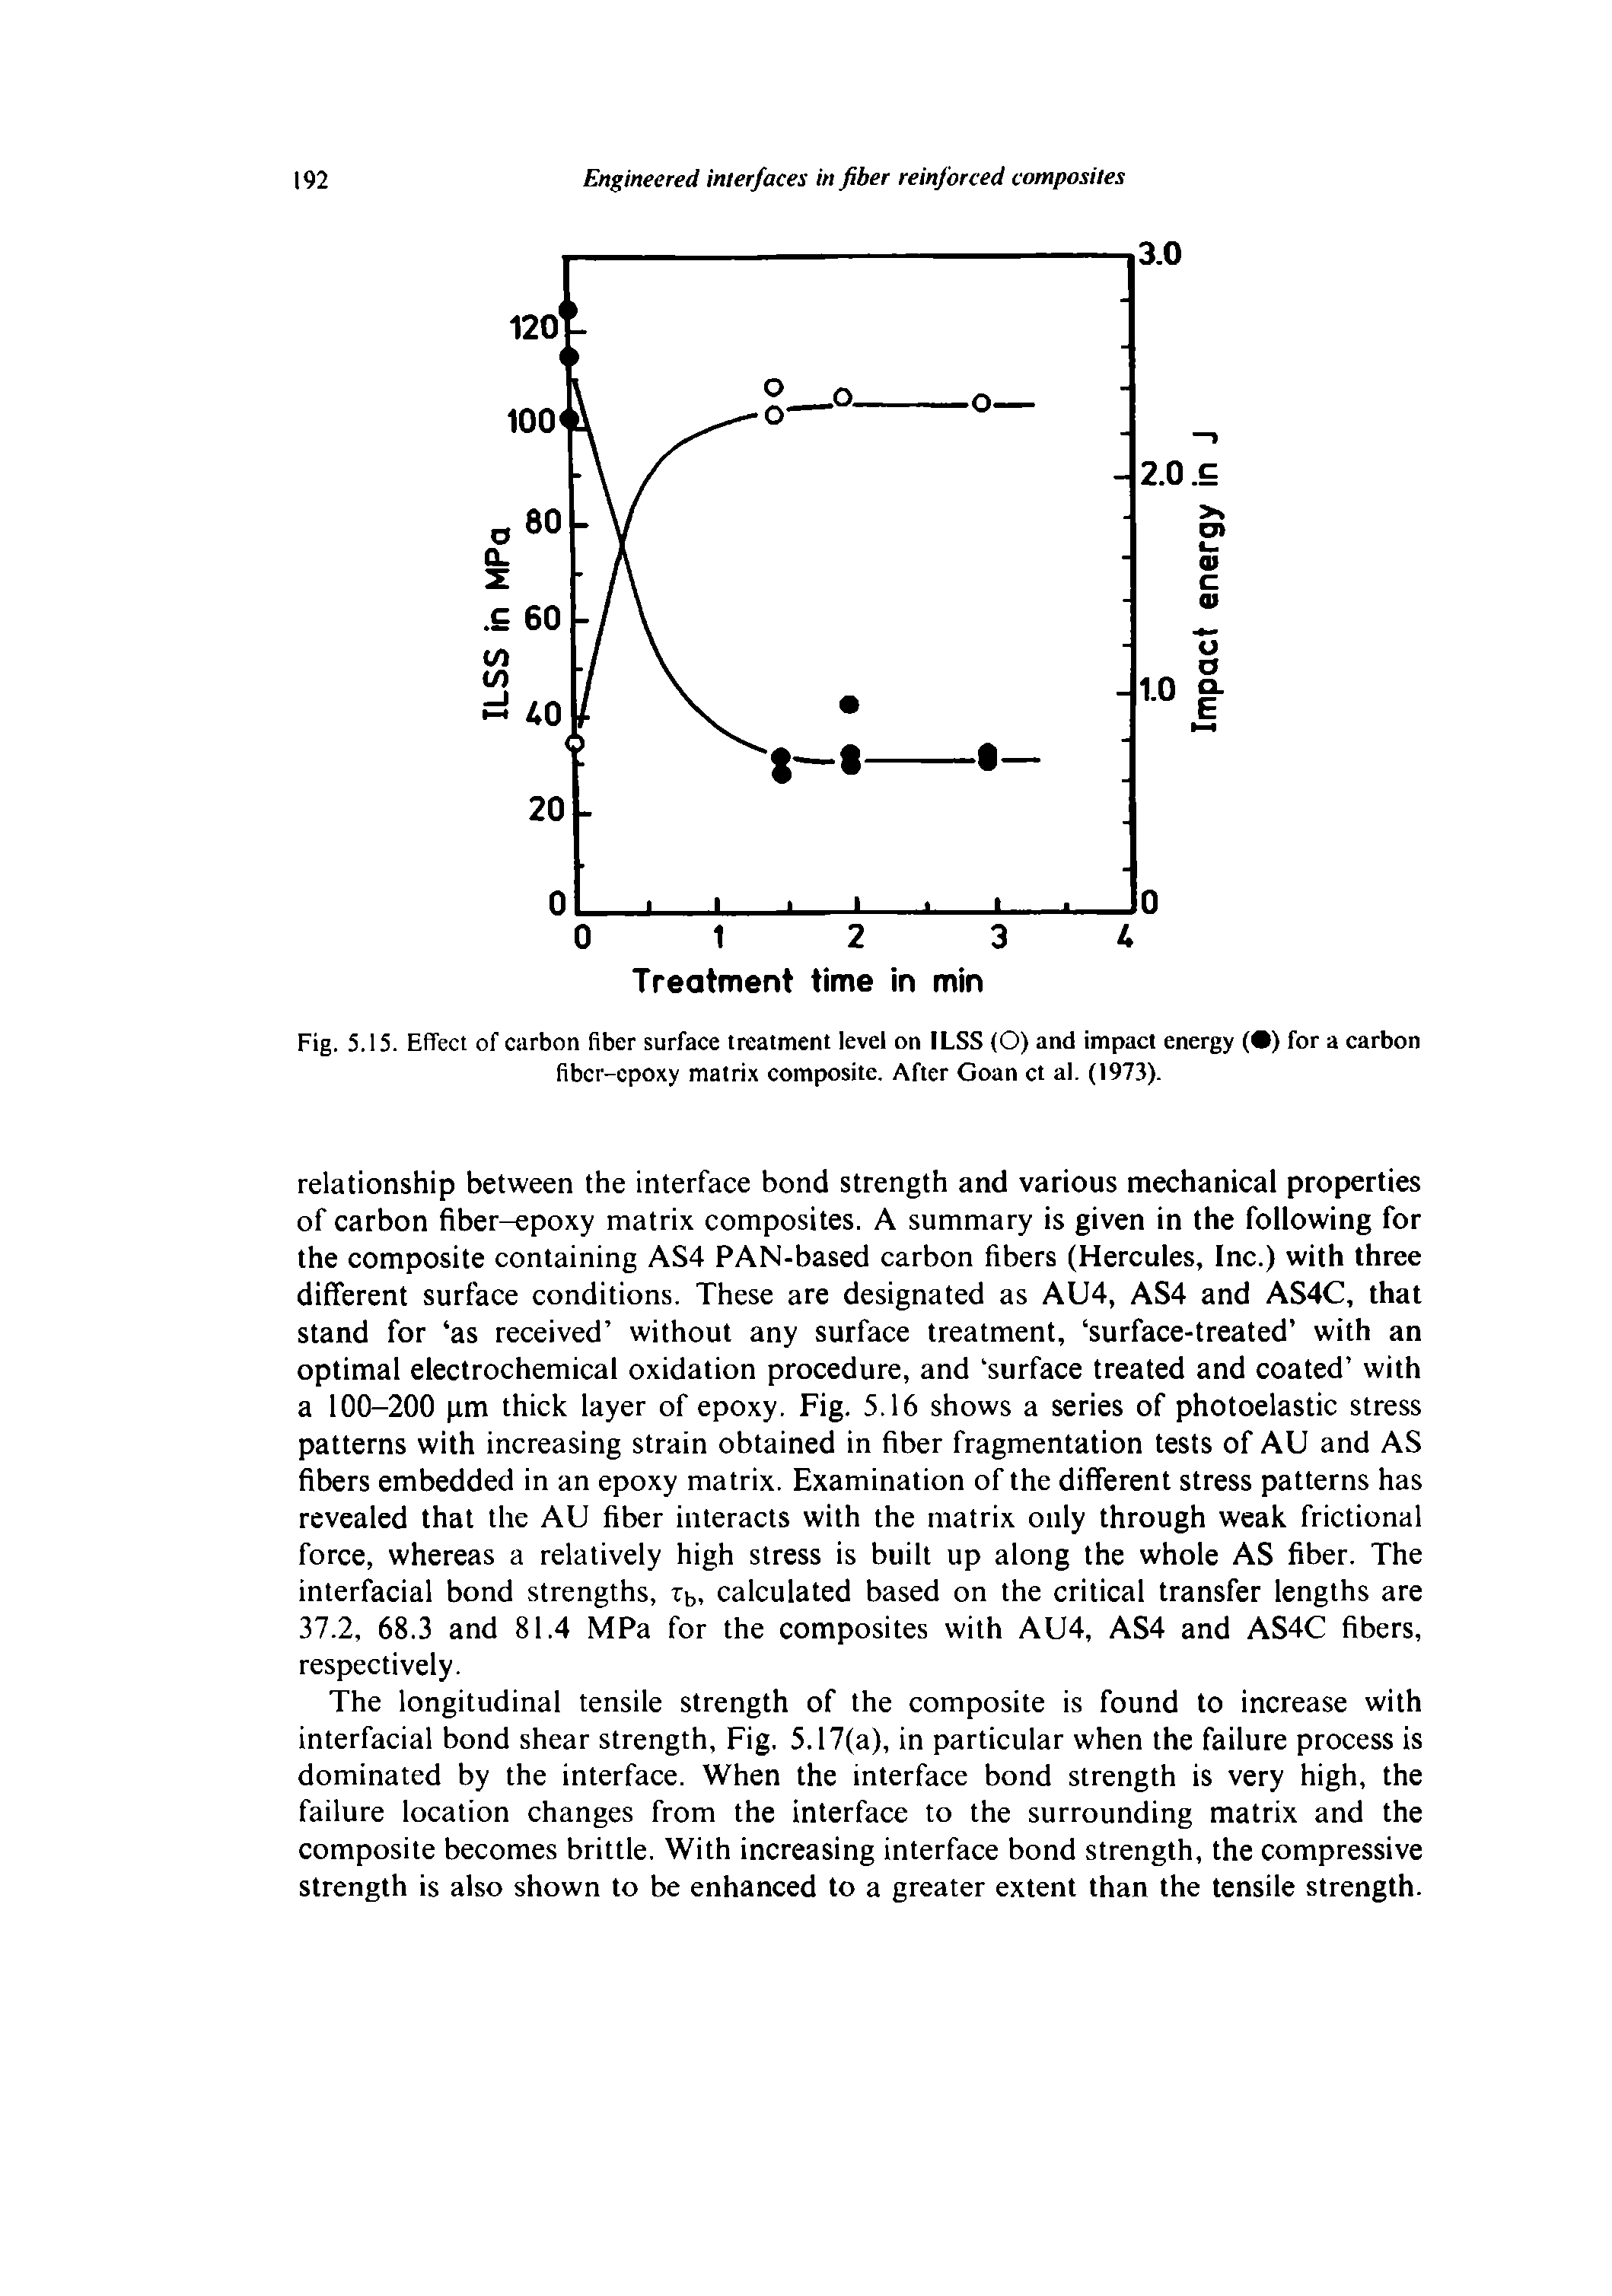 Fig. 5.15. Effect of carbon fiber surface treatment level on ILSS (O) and impact energy ( ) for a carbon fibcr-cpoxy matri.x composite. After Goan ct al. (1973).